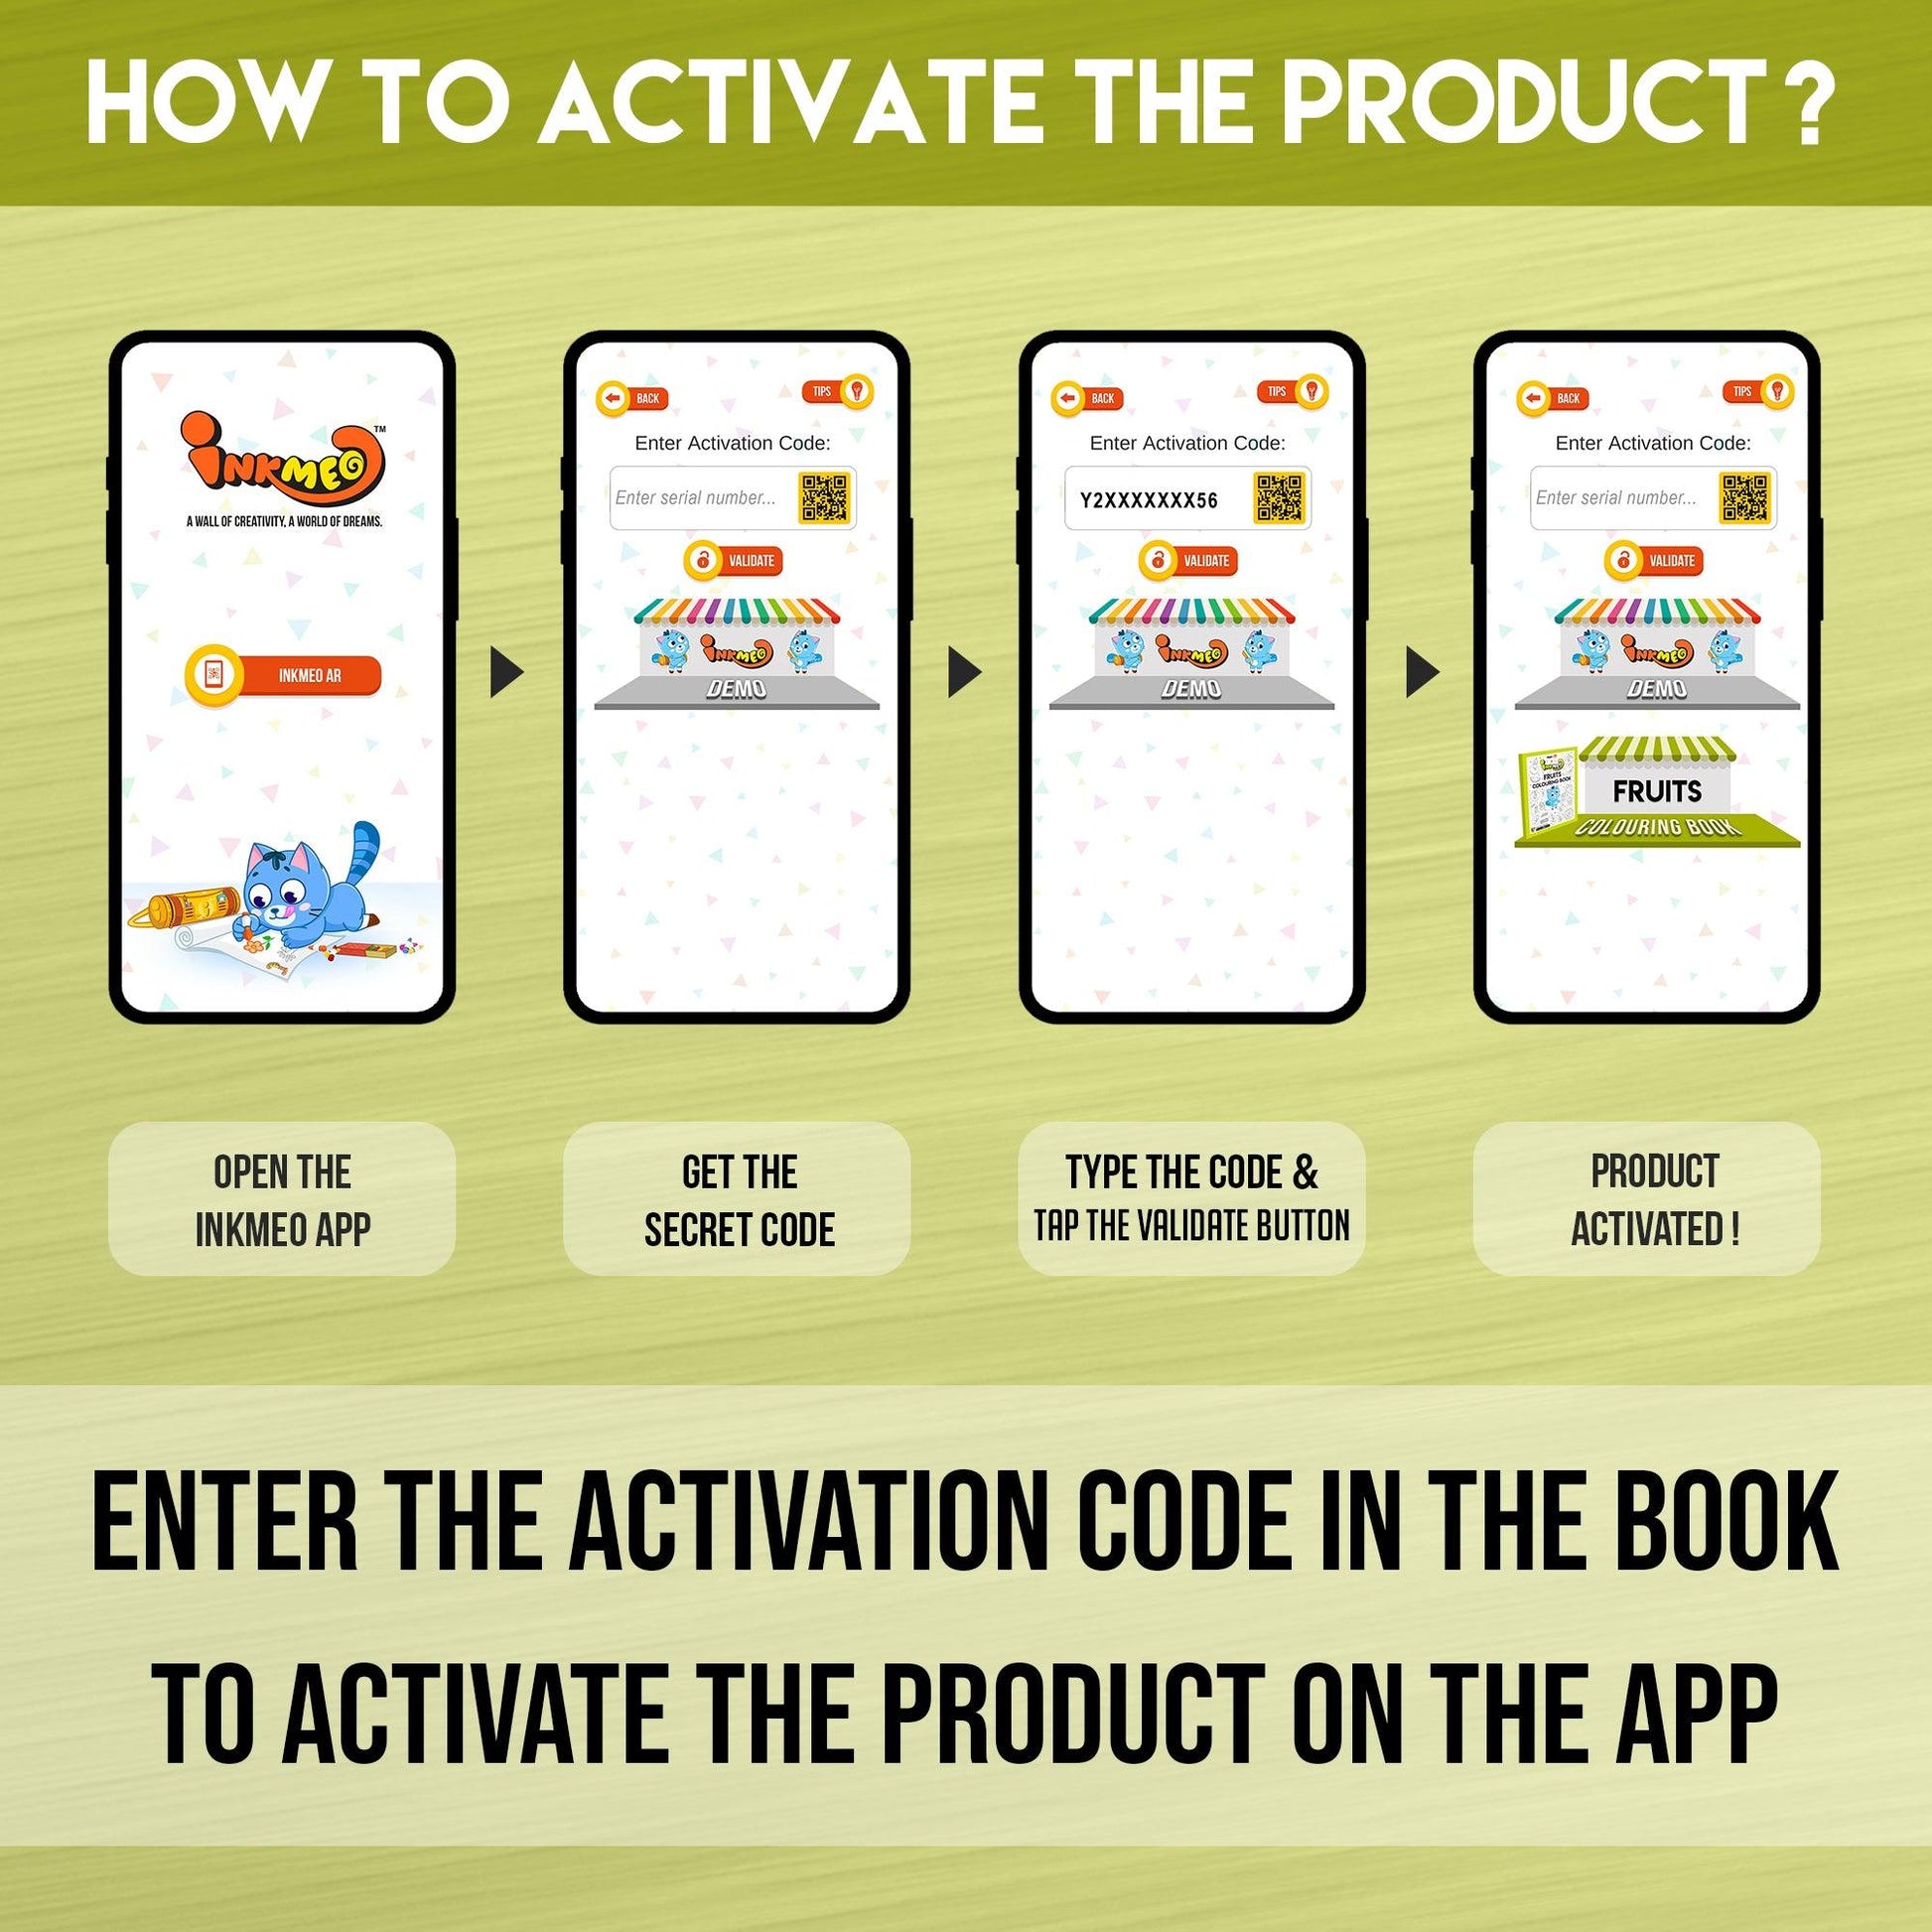 The image displays a green background with four phones showcasing the message "To access the Inkmeo app, acquire the secret code, input the code, and tap for validation to activate the product.